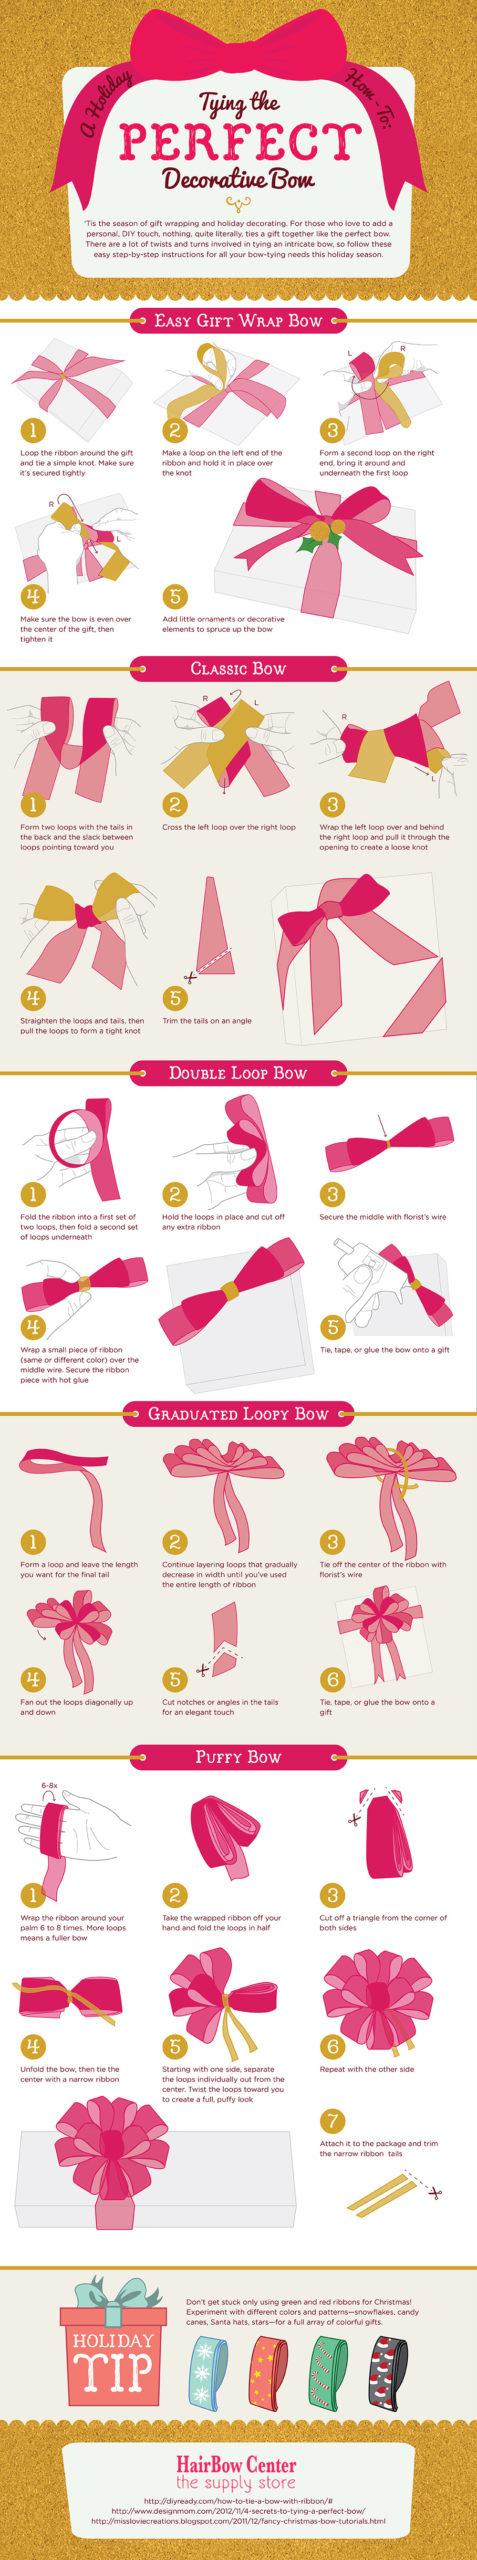 Five Simple Bow Variations That Make Wrapping Gifts Easy [Infographic]